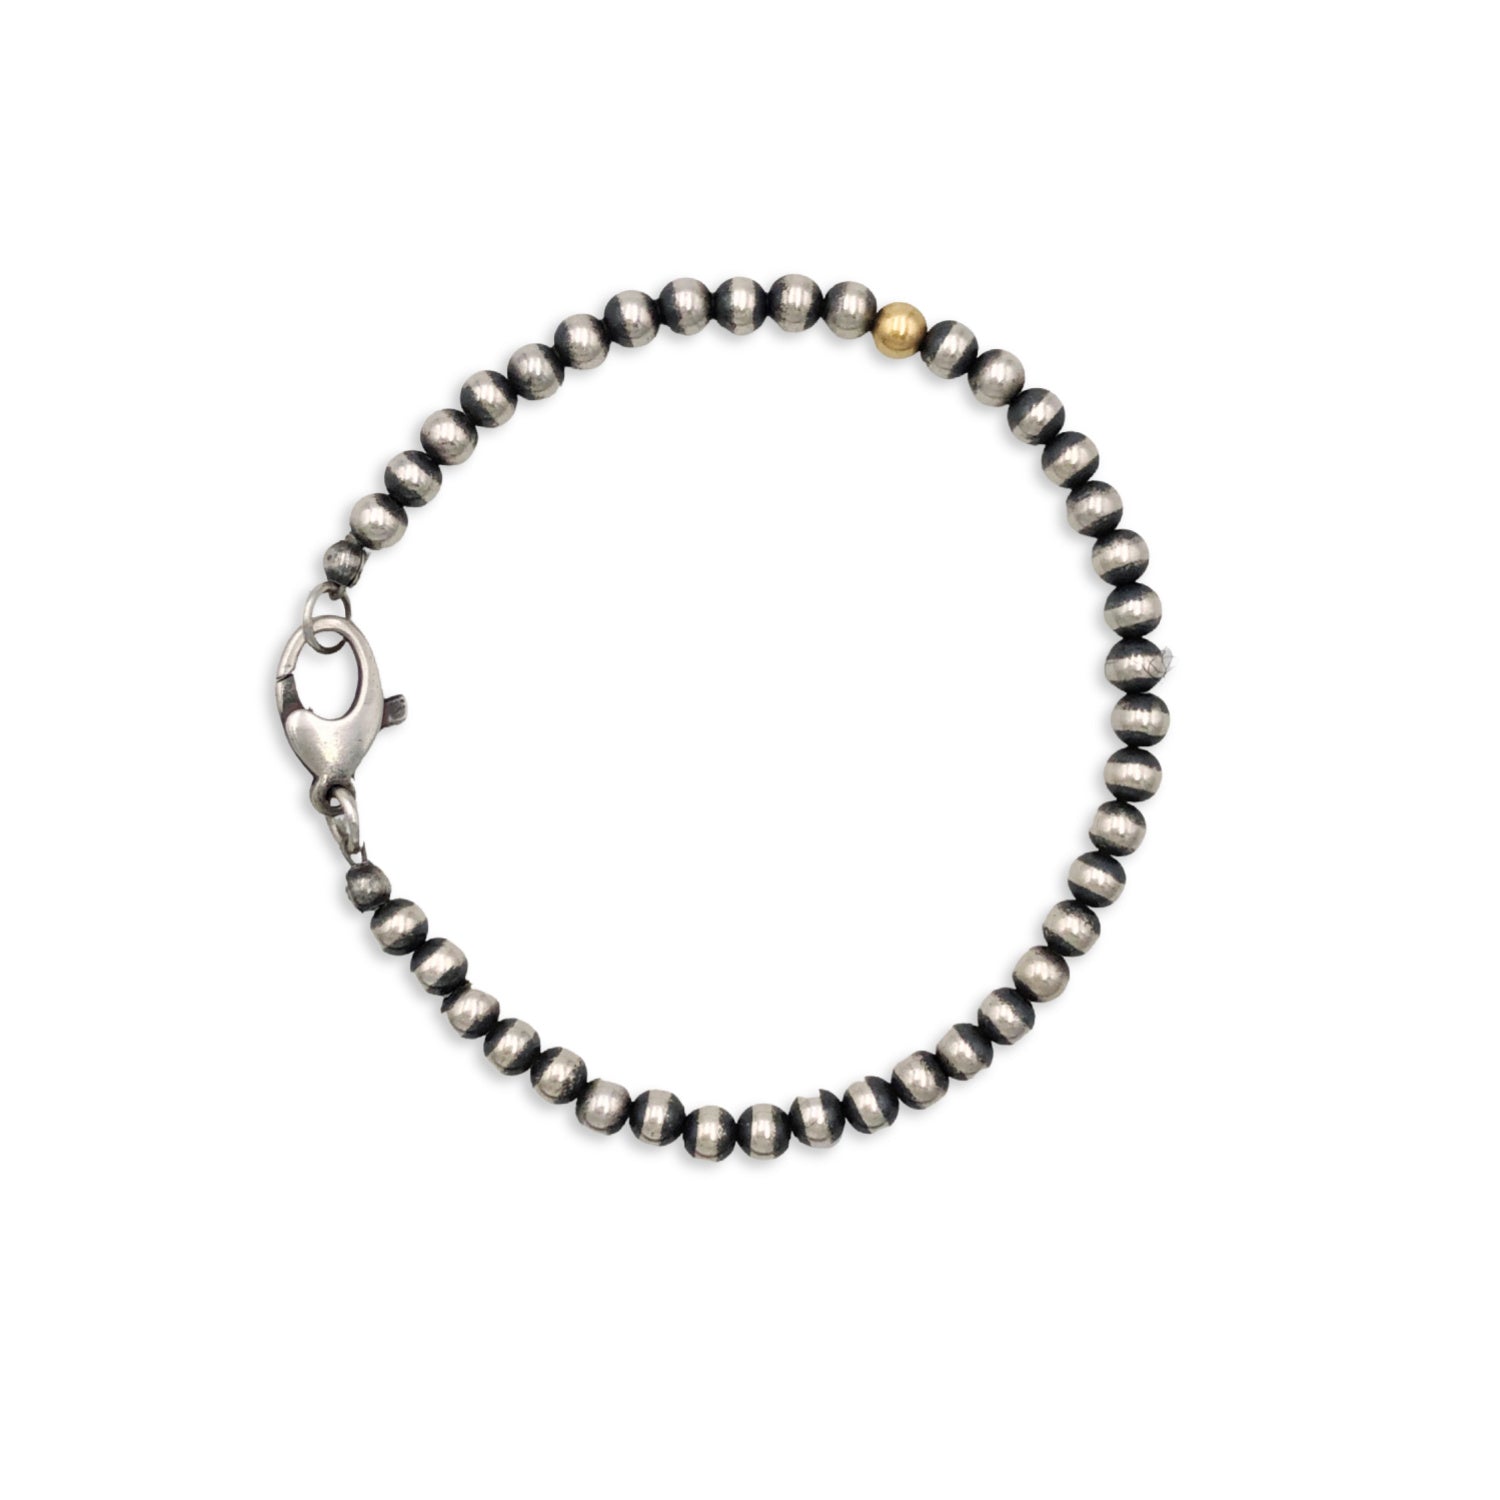 Silver Beaded Bracelet with Gold Bead